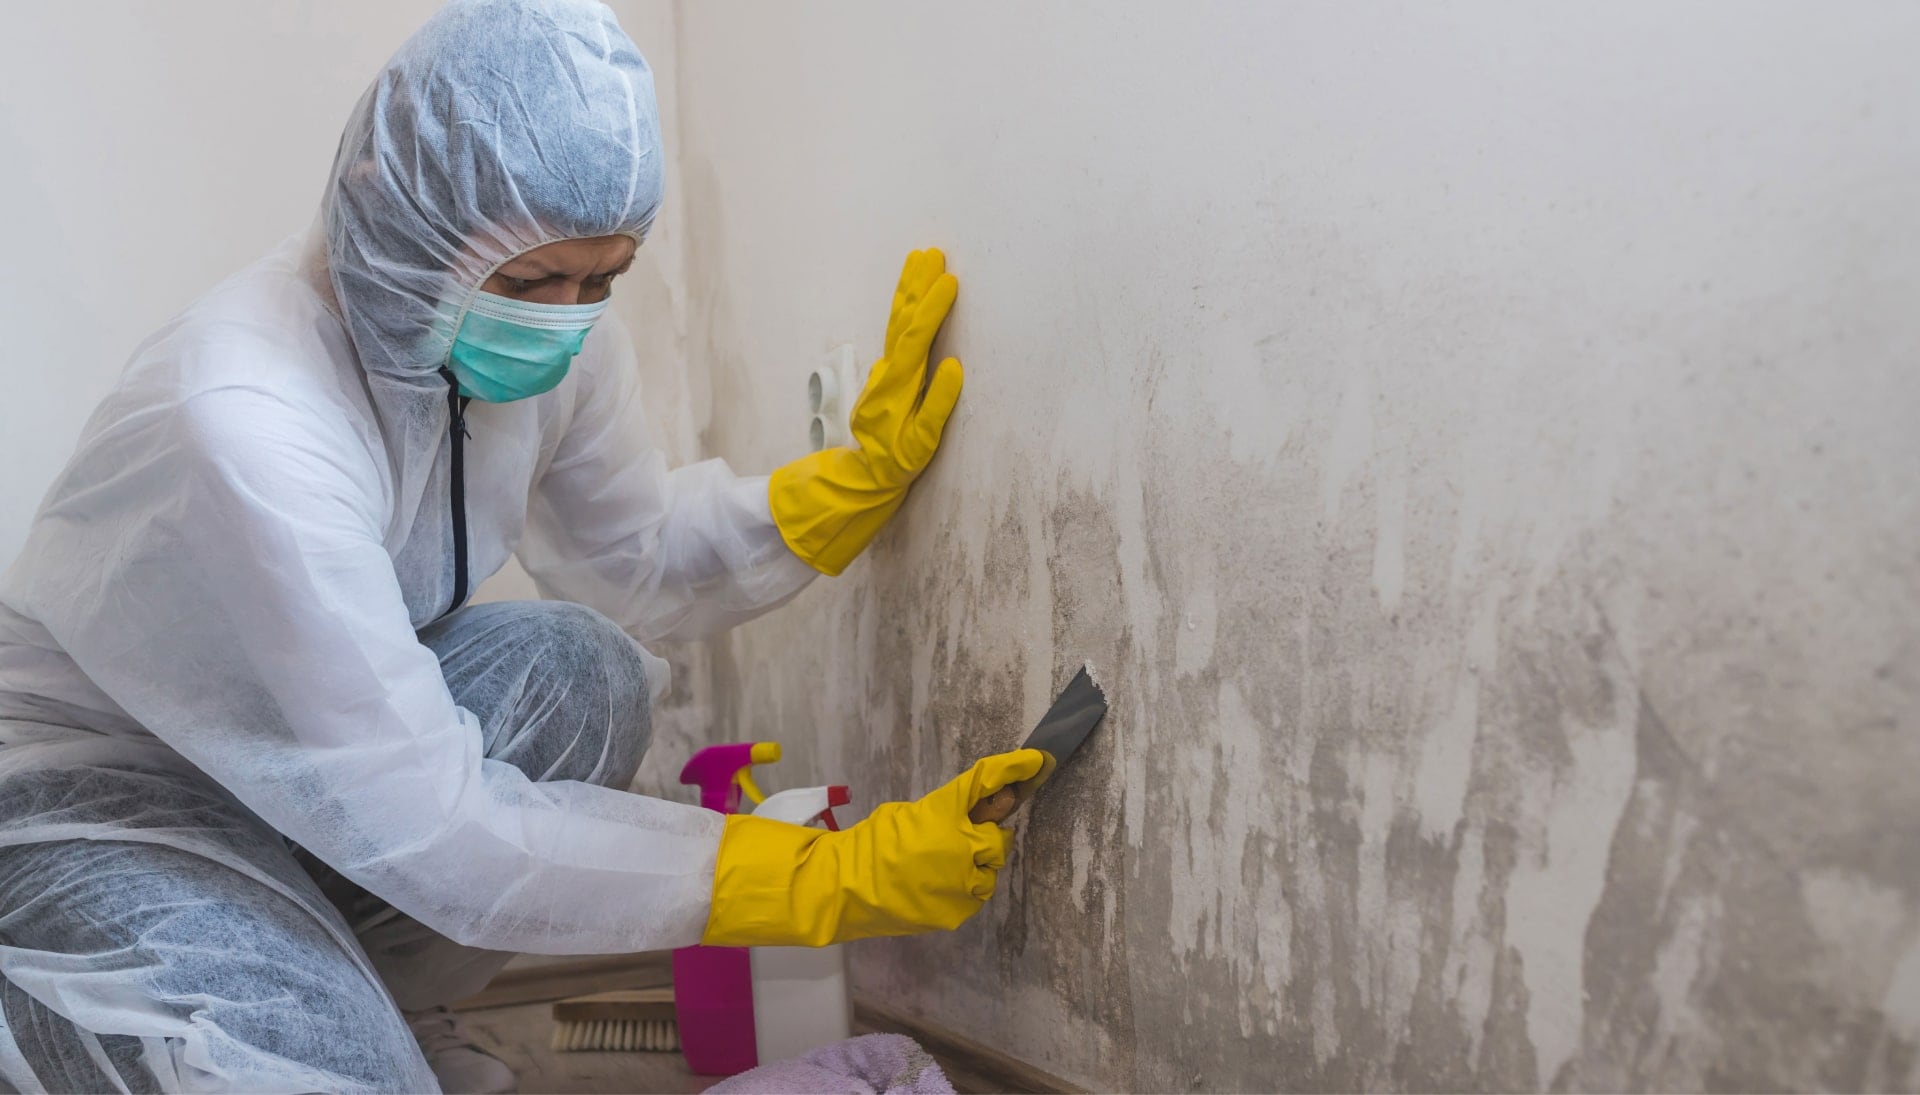 A mold remediation team using specialized techniques to remove mold damage and control odors in a Green Bay property, with a focus on safety and efficiency